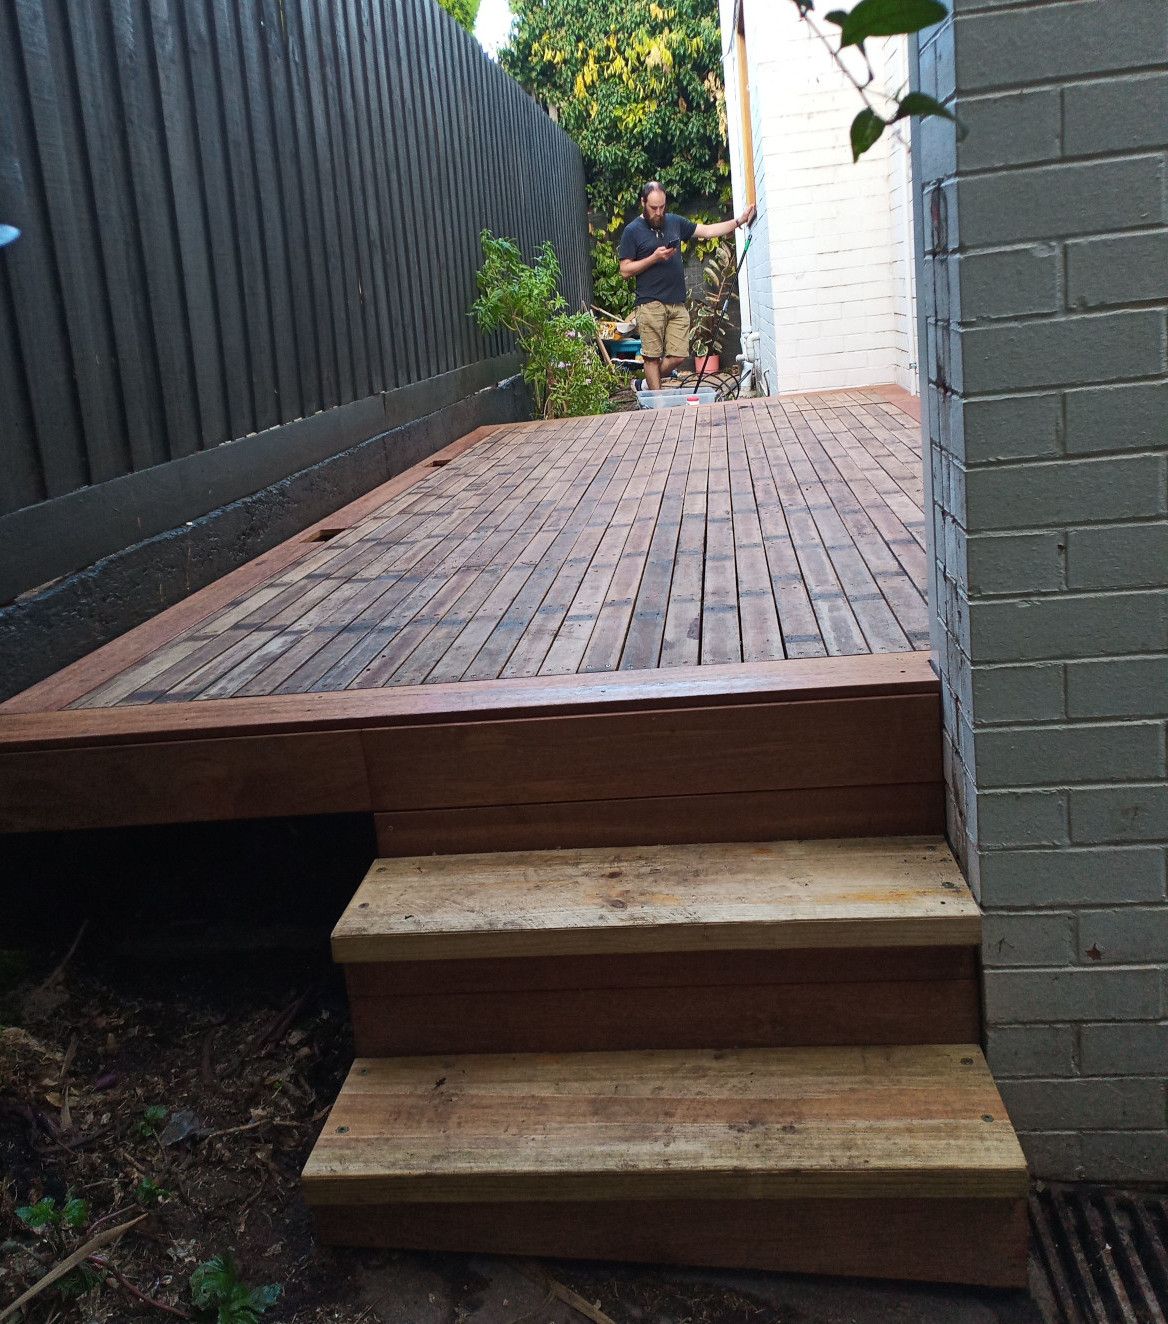 Low-level deck using reclaimed timber | Bunnings Workshop community